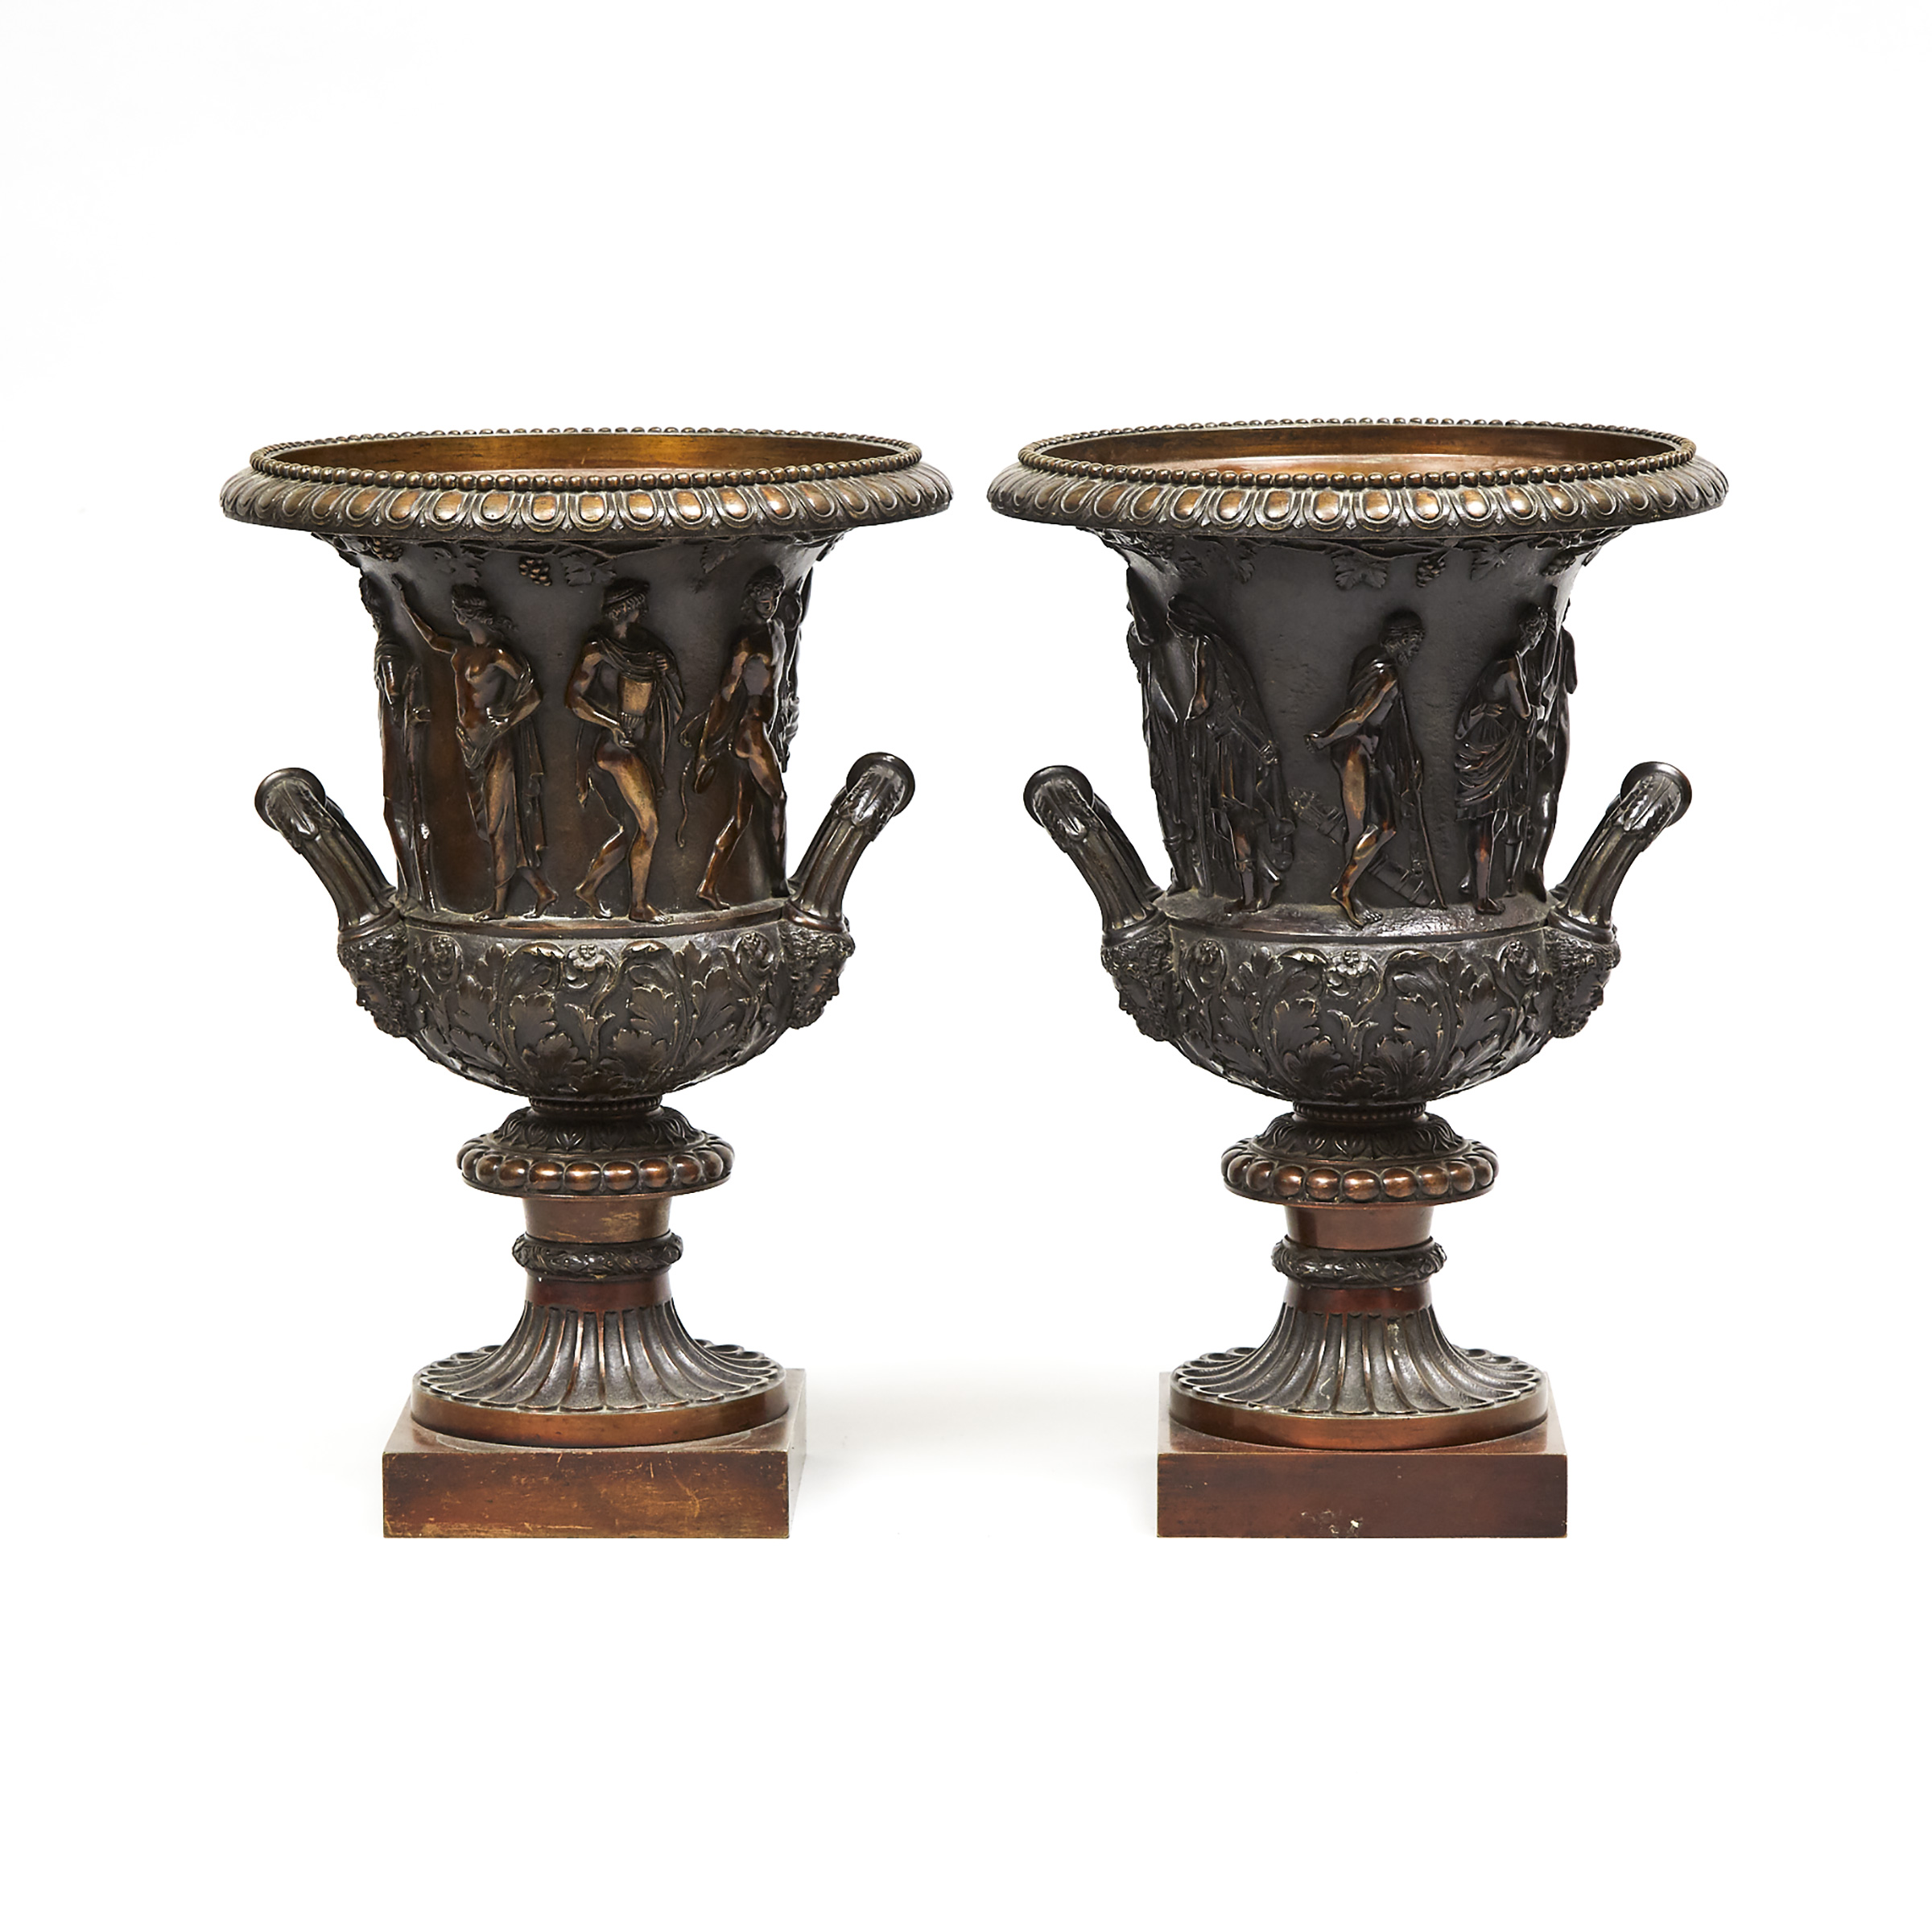 Pair of Italian Bronze Models of the Medici and Borghese Campana Vases, c.1900